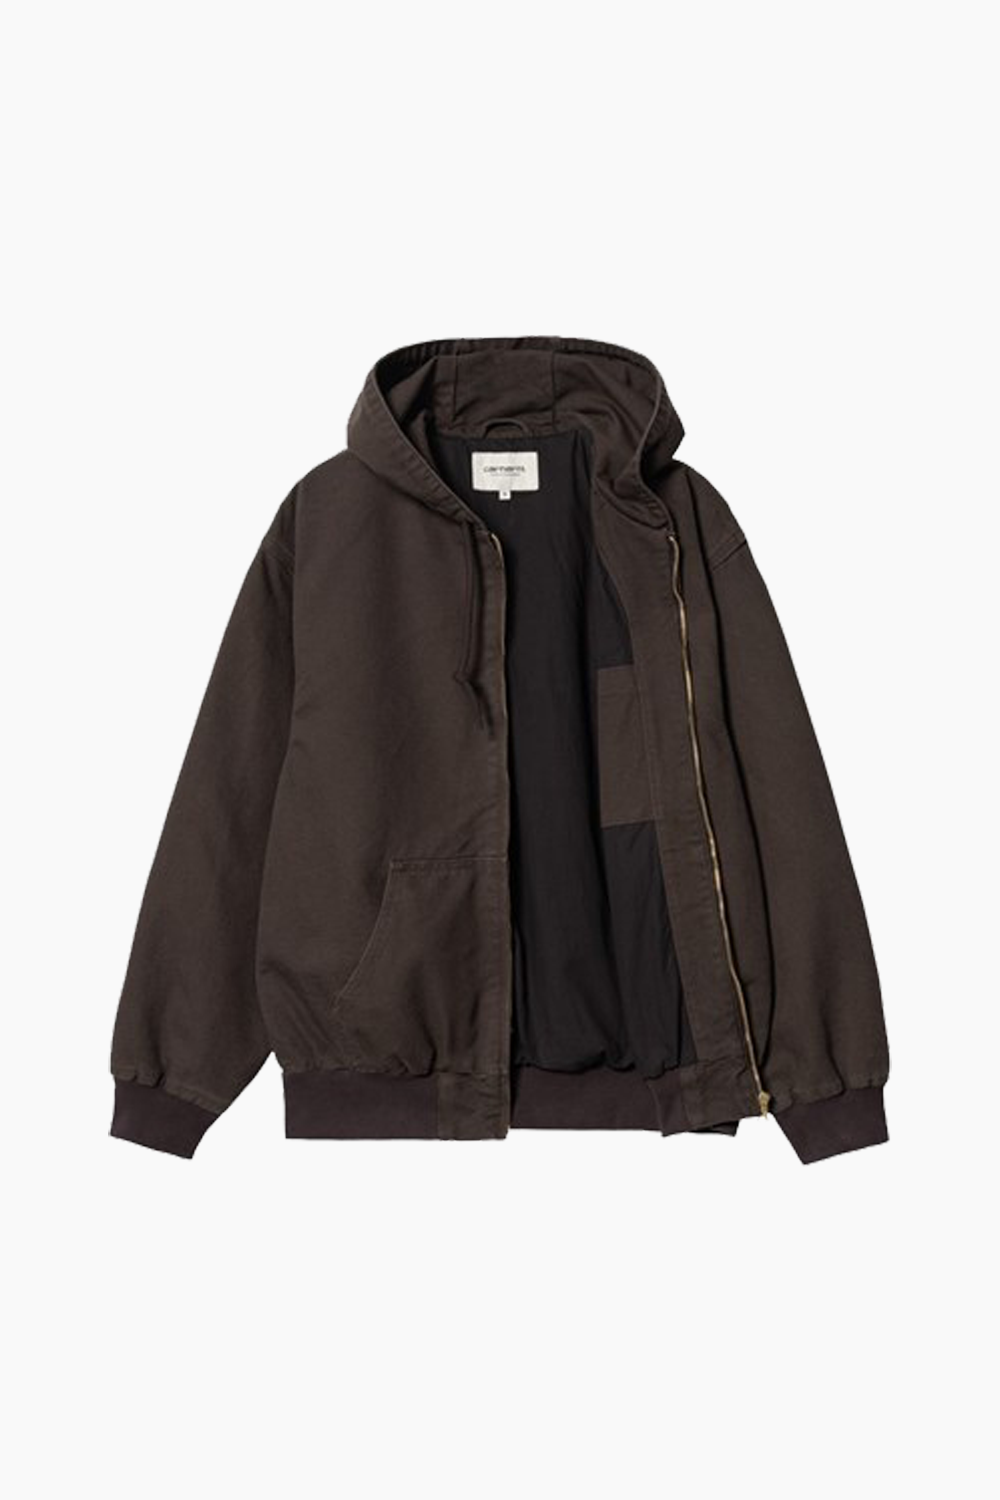 W' OG Active Jacket Straight - Tobacco Rinsed - Carhartt WIP